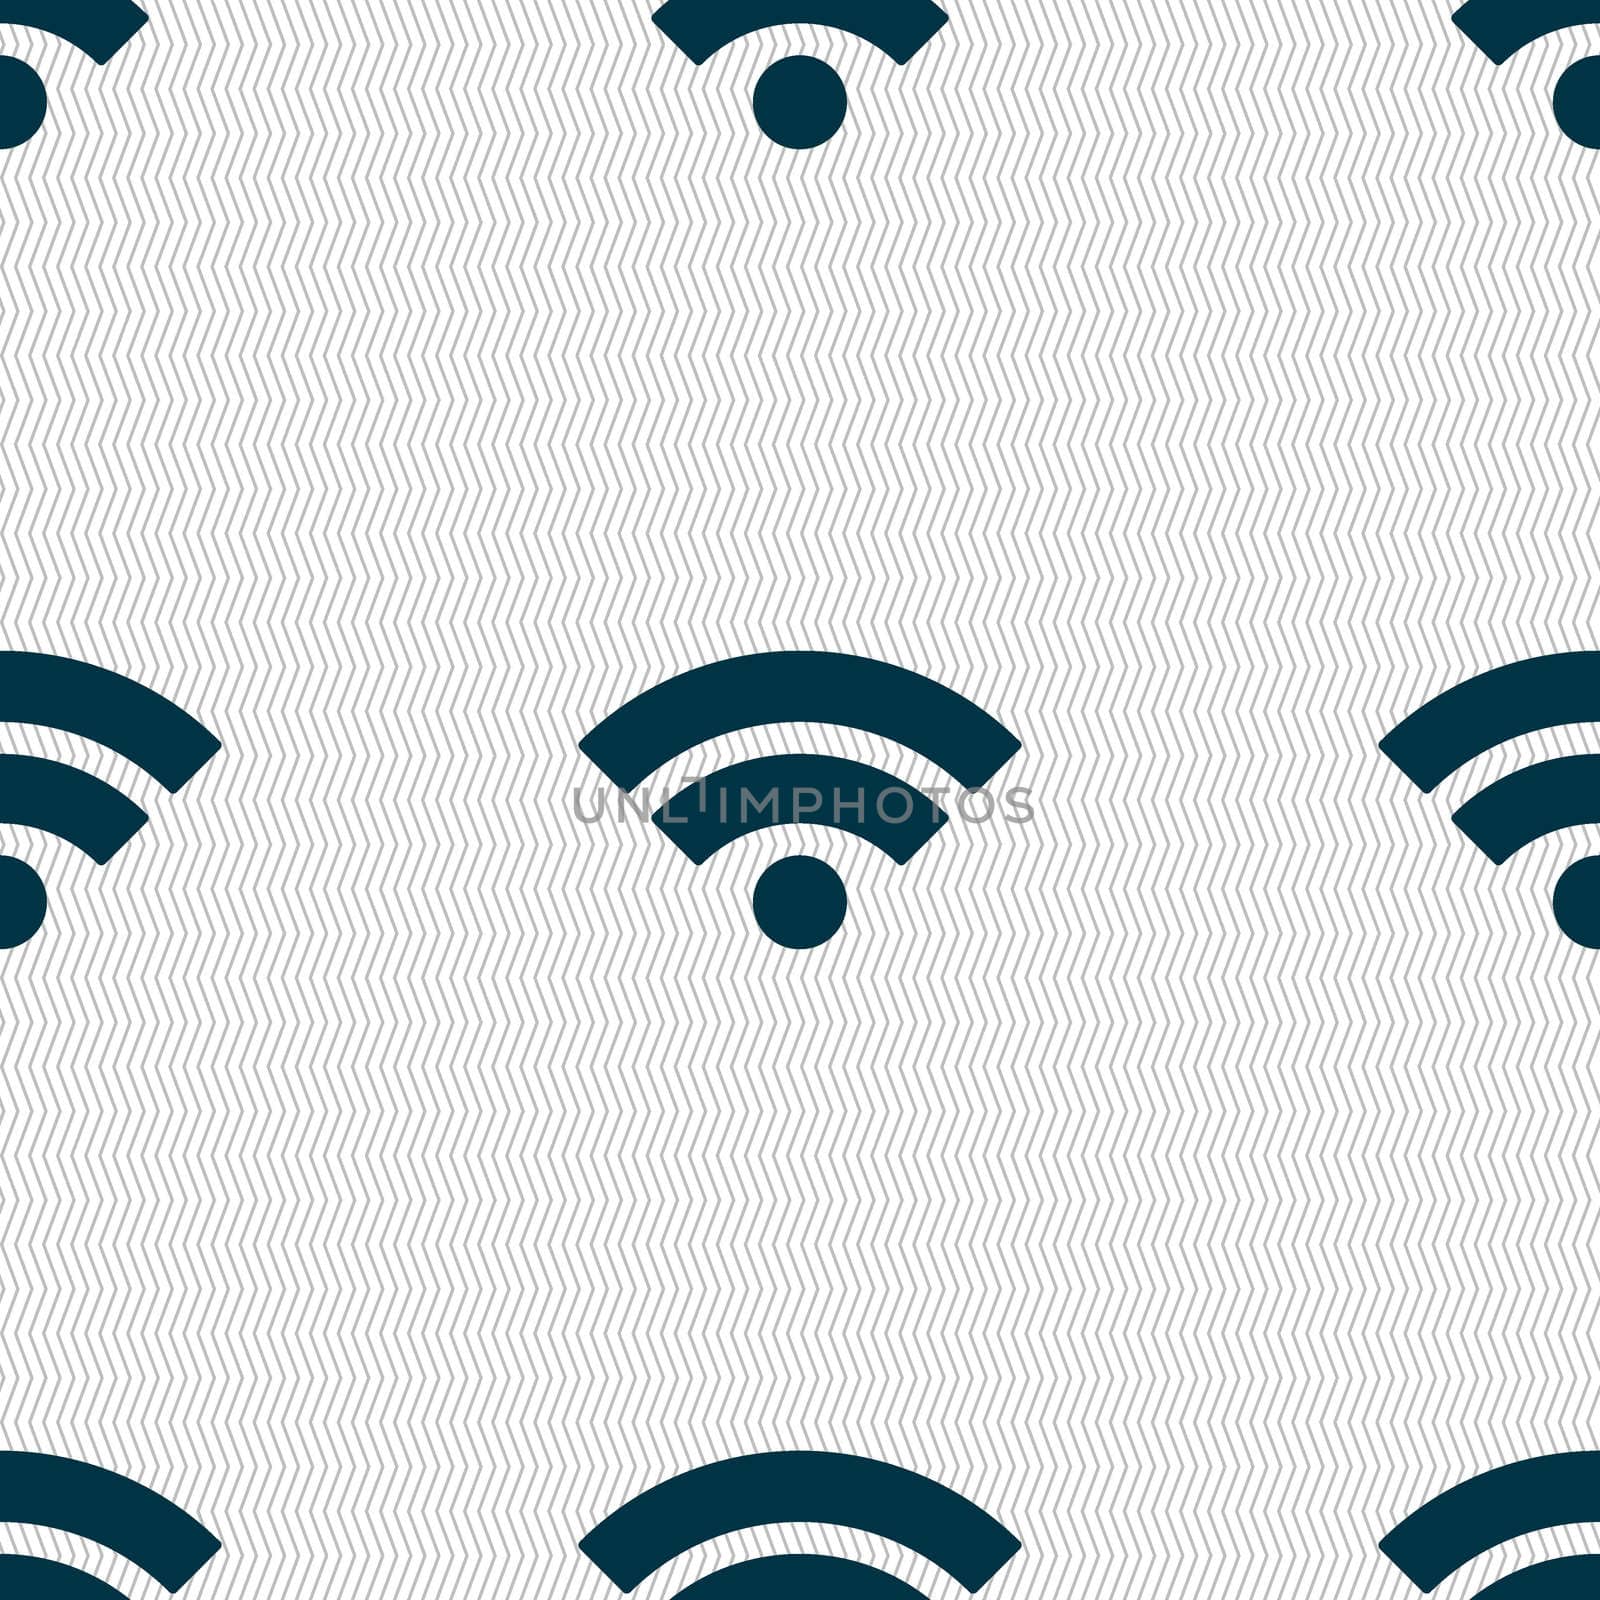 Wifi sign. Wi-fi symbol. Wireless Network icon. Wifi zone. Seamless abstract background with geometric shapes. illustration